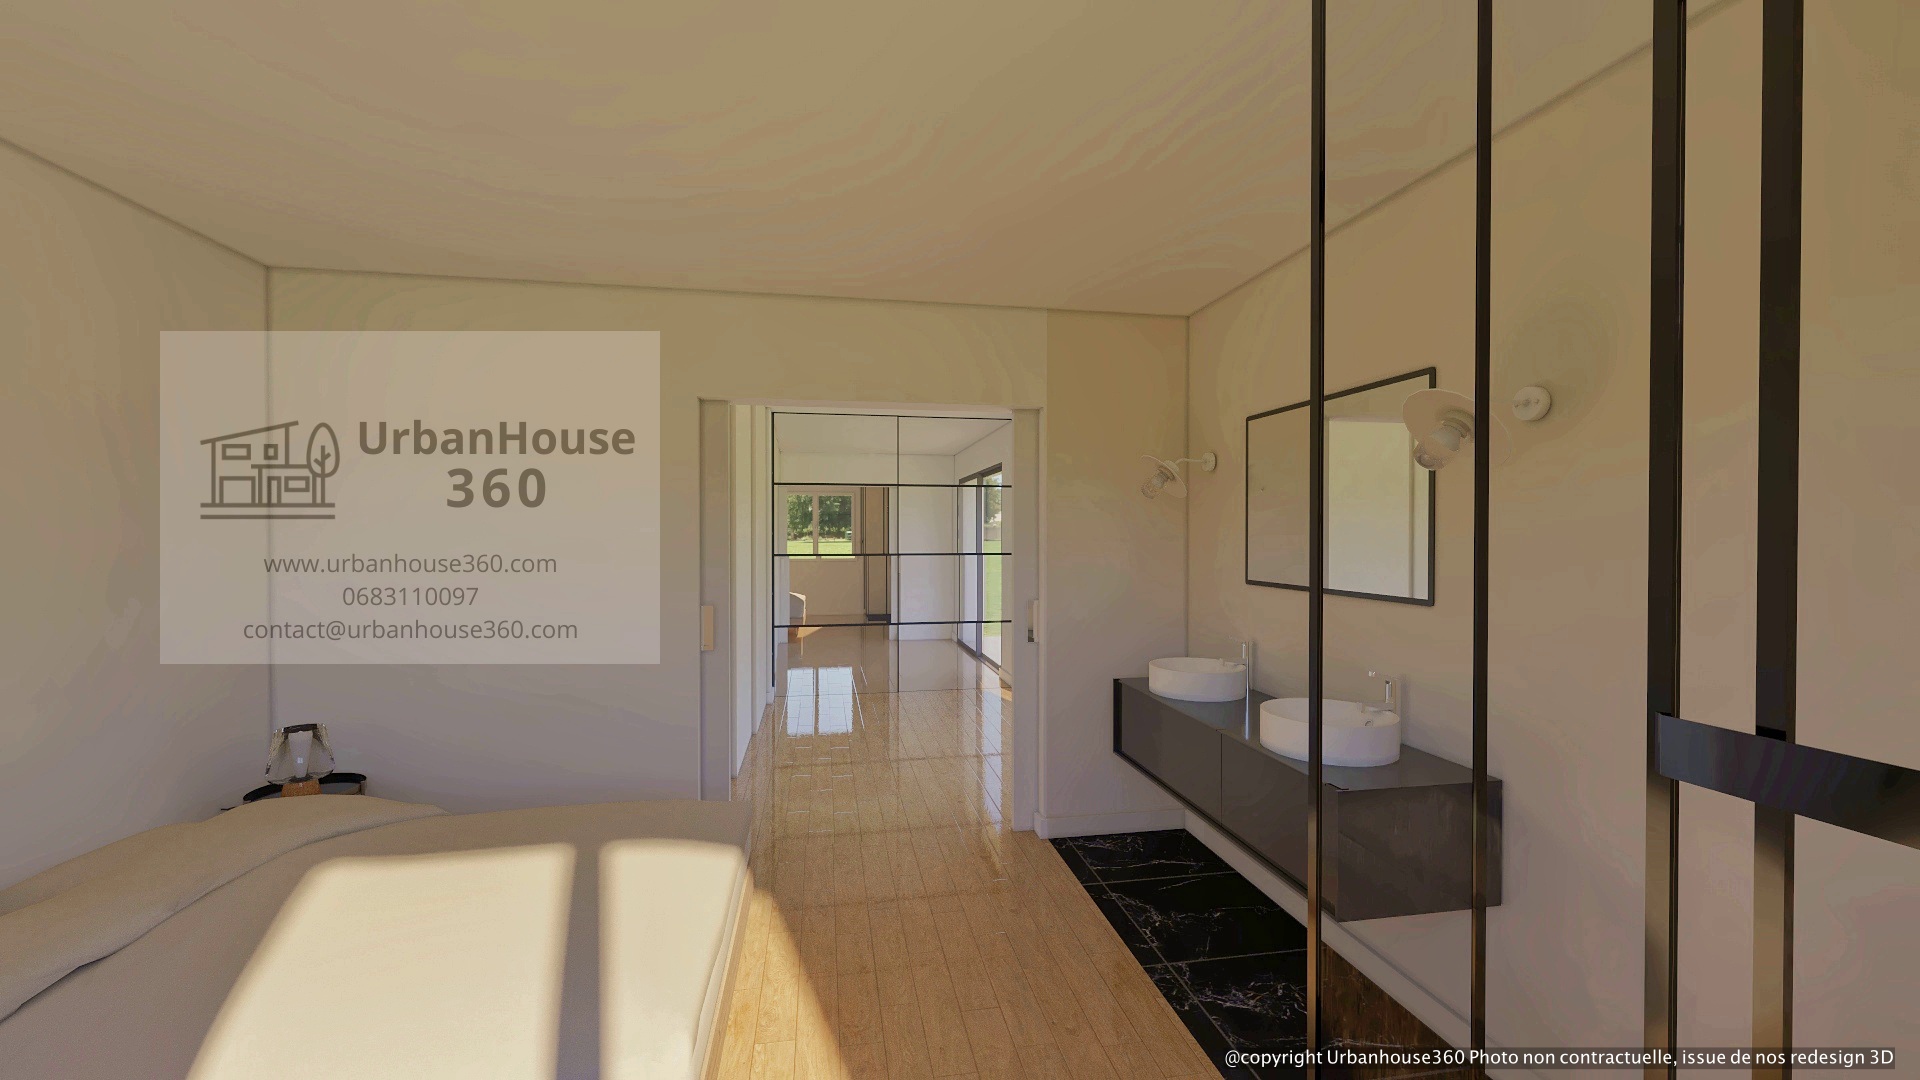 Urbanhouse360-Coulounieix-chamiers-Chambre_3